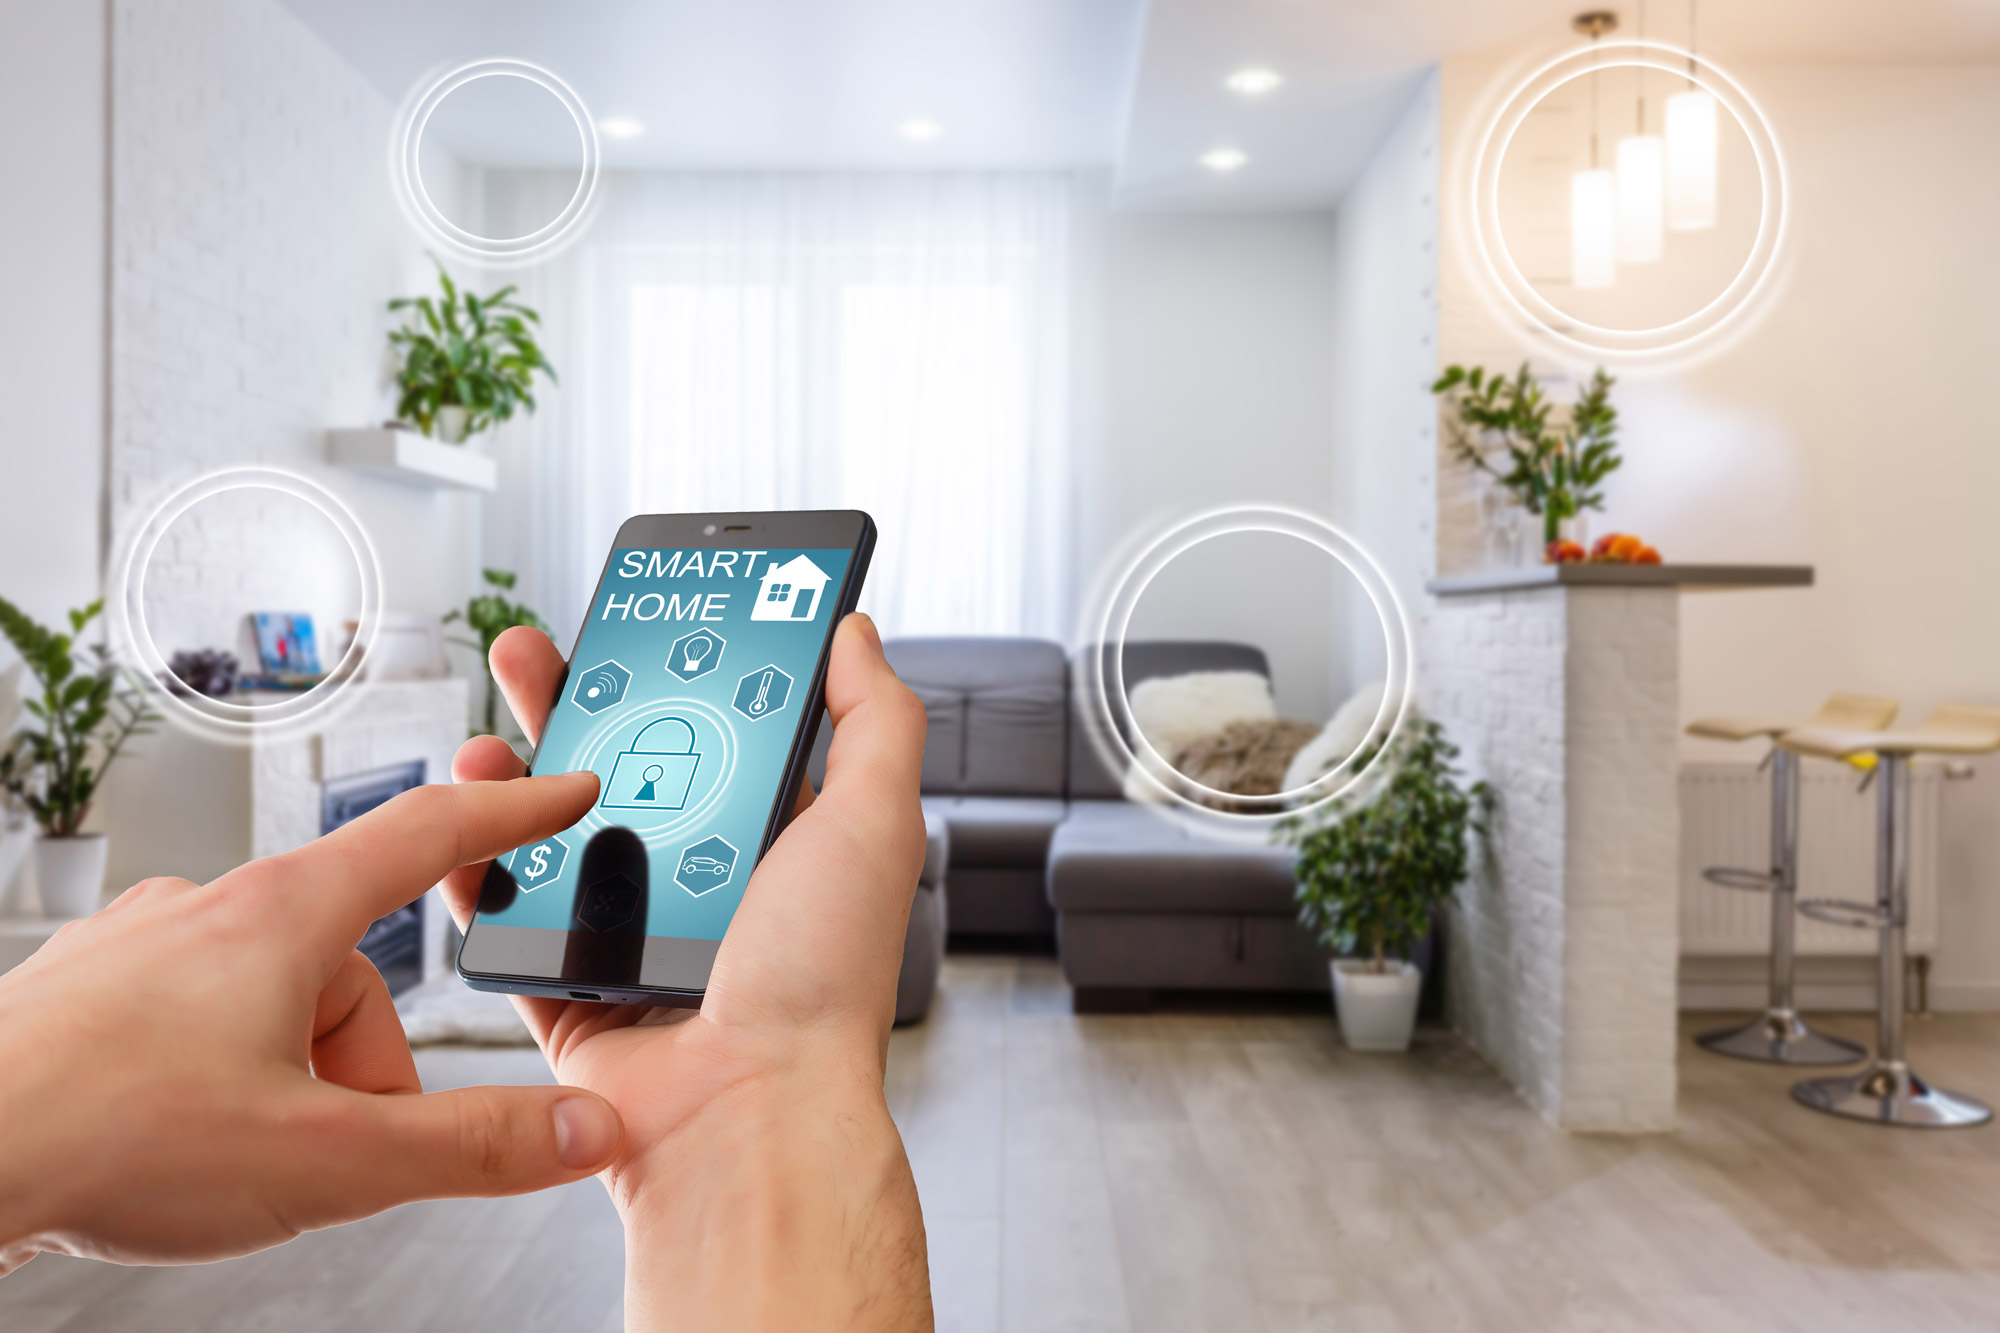 Top 7 Energy-Saving Smart Home Devices